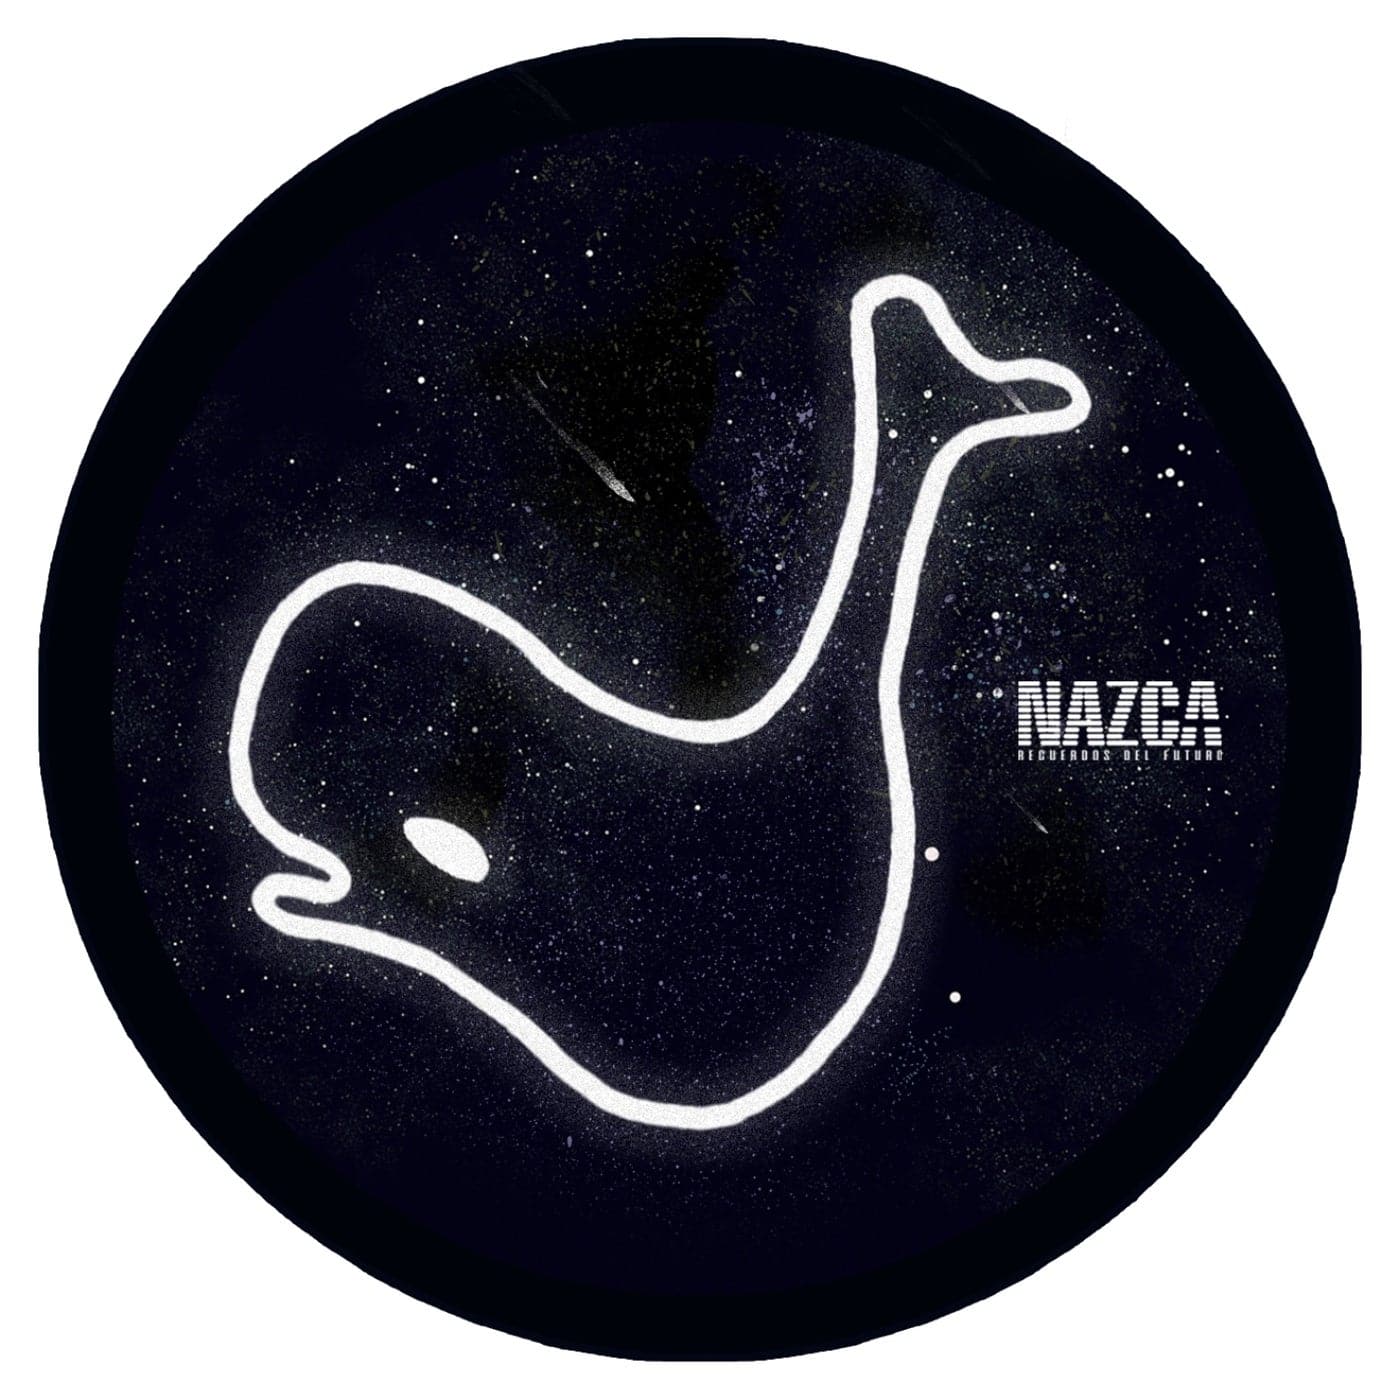 image cover: Octave, Sam Farsio - WAVES EP on Nazca